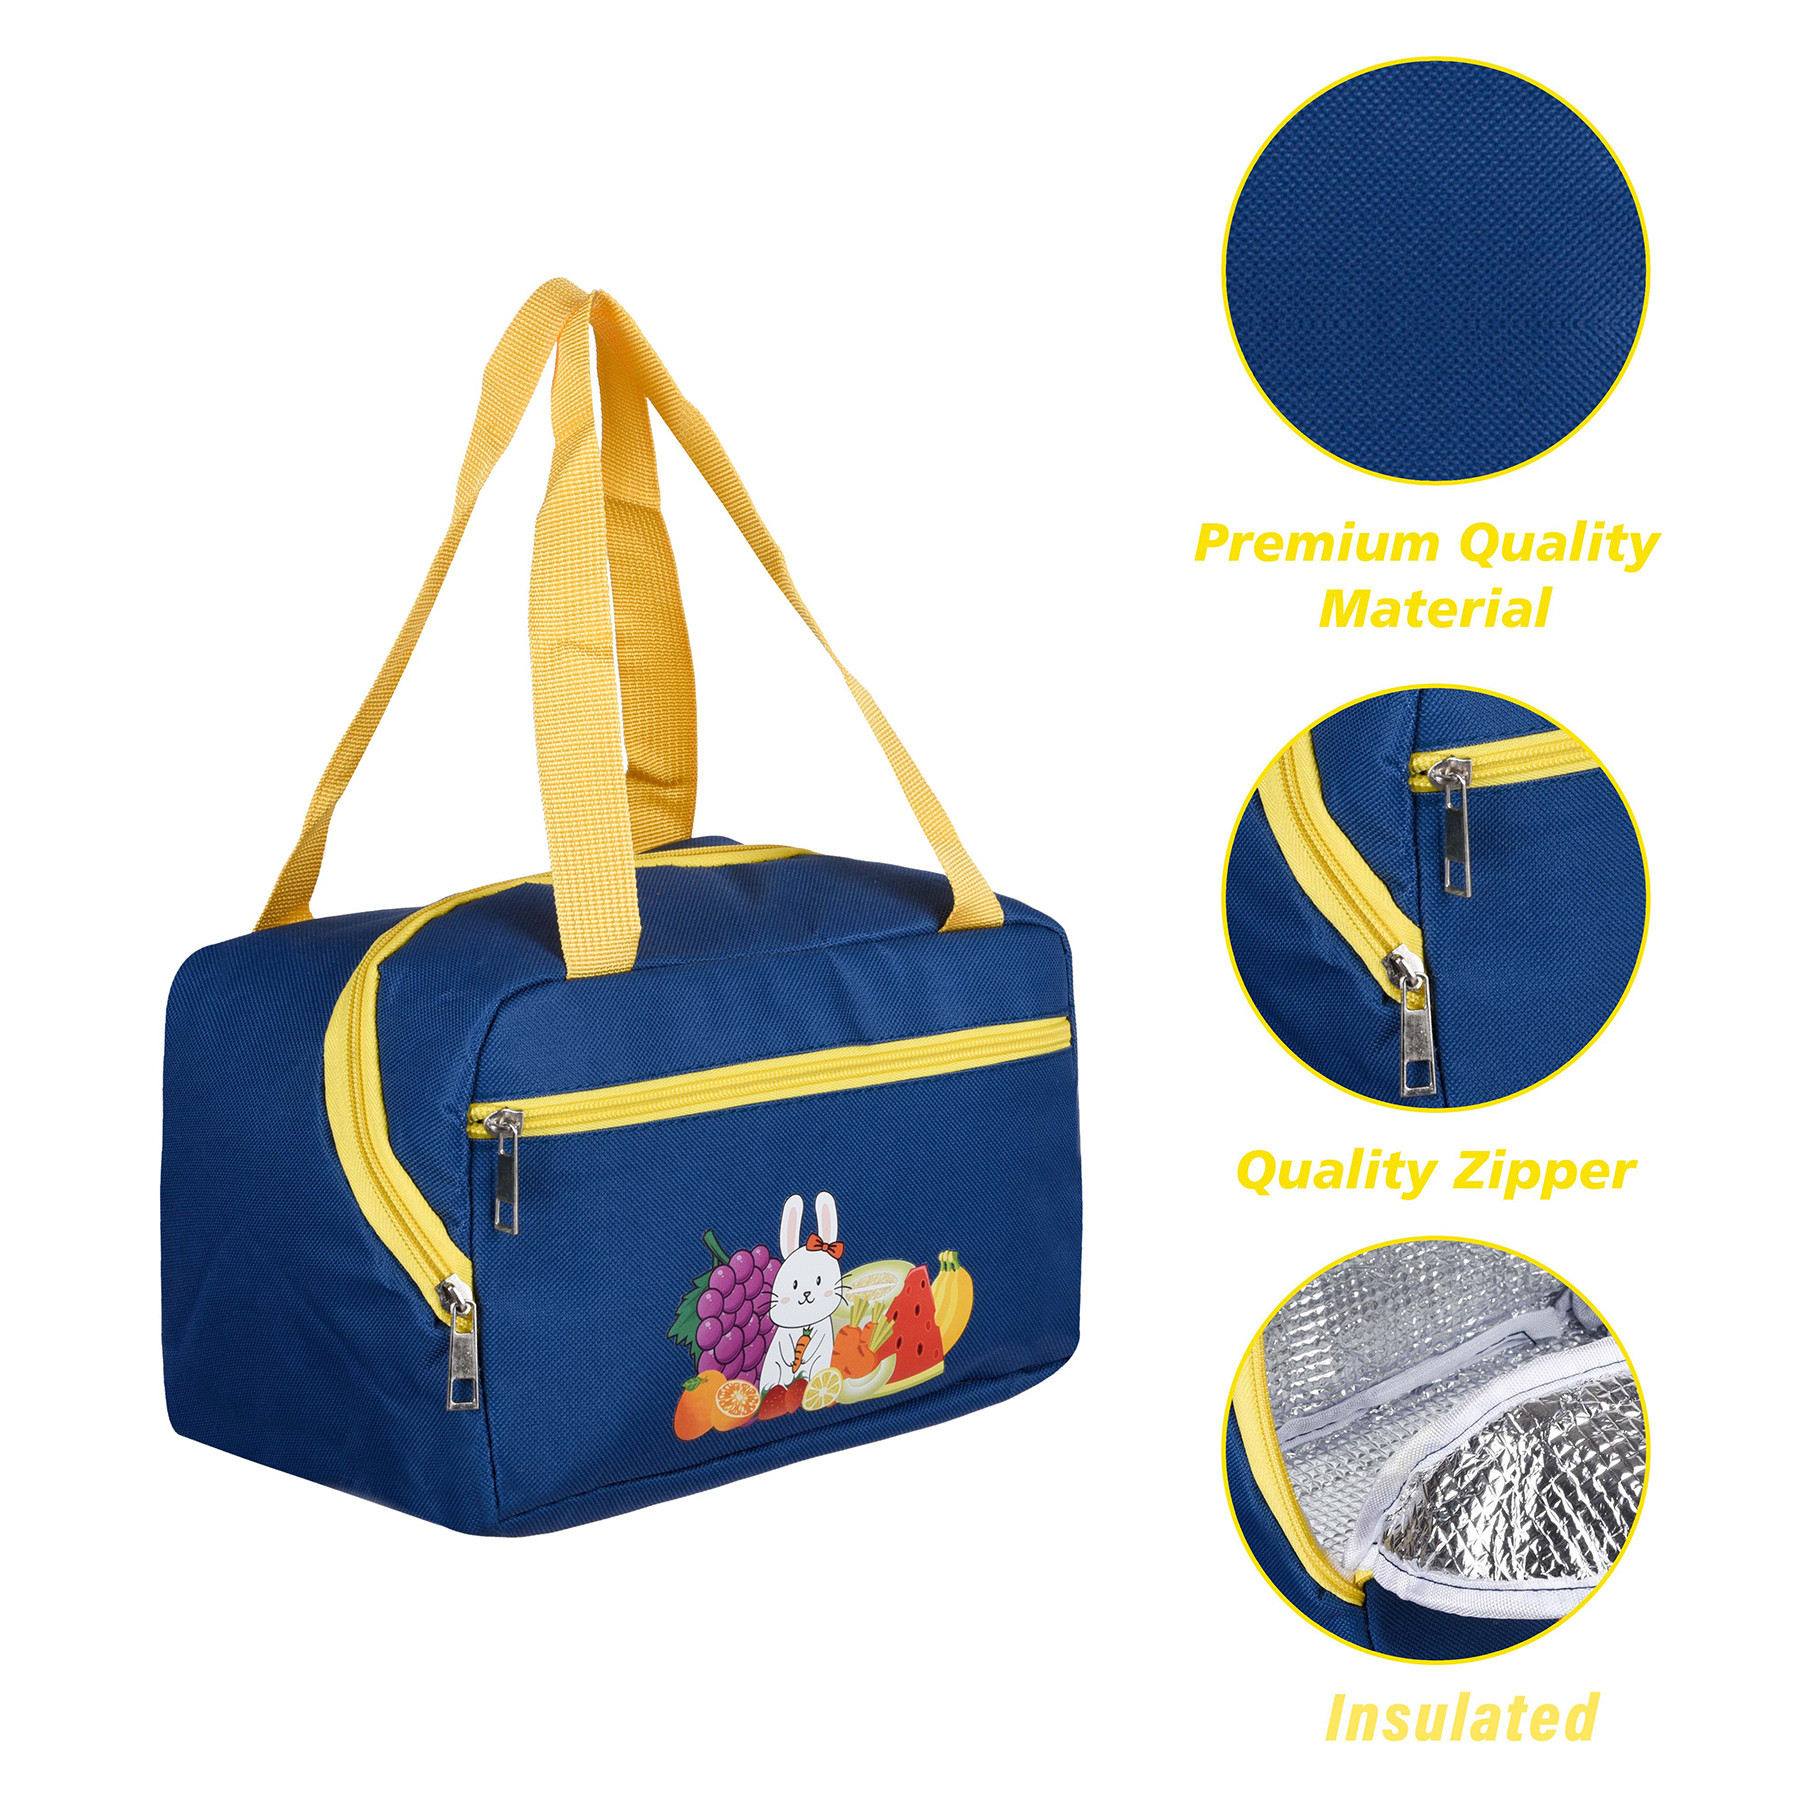 Kuber Industries Lunch Bag | Thermal Insulated Lunch Bag | Lunch Bag for Office | Lunch Bag for Camping with Front Pocket | Waterproof Tiffin Cover with Handle | Fruit Rabbit-Print | Blue